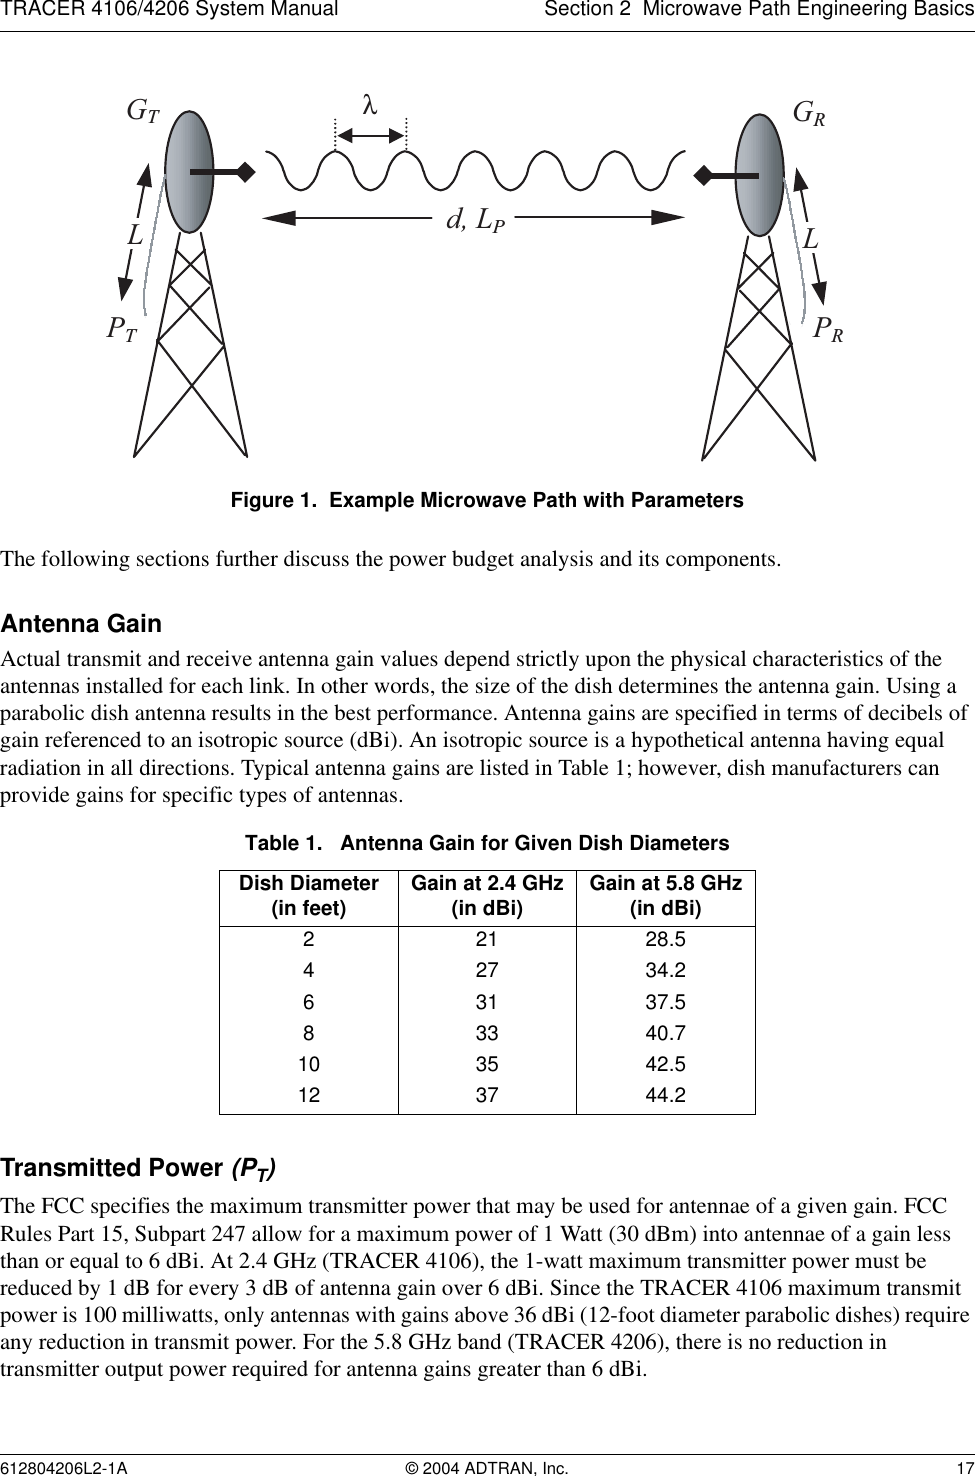 TRACER 4106/4206 System Manual Section 2  Microwave Path Engineering Basics612804206L2-1A © 2004 ADTRAN, Inc. 17Figure 1.  Example Microwave Path with ParametersThe following sections further discuss the power budget analysis and its components.Antenna GainActual transmit and receive antenna gain values depend strictly upon the physical characteristics of the antennas installed for each link. In other words, the size of the dish determines the antenna gain. Using a parabolic dish antenna results in the best performance. Antenna gains are specified in terms of decibels of gain referenced to an isotropic source (dBi). An isotropic source is a hypothetical antenna having equal radiation in all directions. Typical antenna gains are listed in Table 1; however, dish manufacturers can provide gains for specific types of antennas.Transmitted Power (PT)The FCC specifies the maximum transmitter power that may be used for antennae of a given gain. FCC Rules Part 15, Subpart 247 allow for a maximum power of 1 Watt (30 dBm) into antennae of a gain less than or equal to 6 dBi. At 2.4 GHz (TRACER 4106), the 1-watt maximum transmitter power must be reduced by 1 dB for every 3 dB of antenna gain over 6 dBi. Since the TRACER 4106 maximum transmit power is 100 milliwatts, only antennas with gains above 36 dBi (12-foot diameter parabolic dishes) require any reduction in transmit power. For the 5.8 GHz band (TRACER 4206), there is no reduction in transmitter output power required for antenna gains greater than 6 dBi.Table 1.   Antenna Gain for Given Dish DiametersDish Diameter(in feet) Gain at 2.4 GHz(in dBi) Gain at 5.8 GHz(in dBi)2 21 28.54 27 34.26 31 37.58 33 40.710 35 42.512 37 44.2 GTGRd, LPPTPRλLL